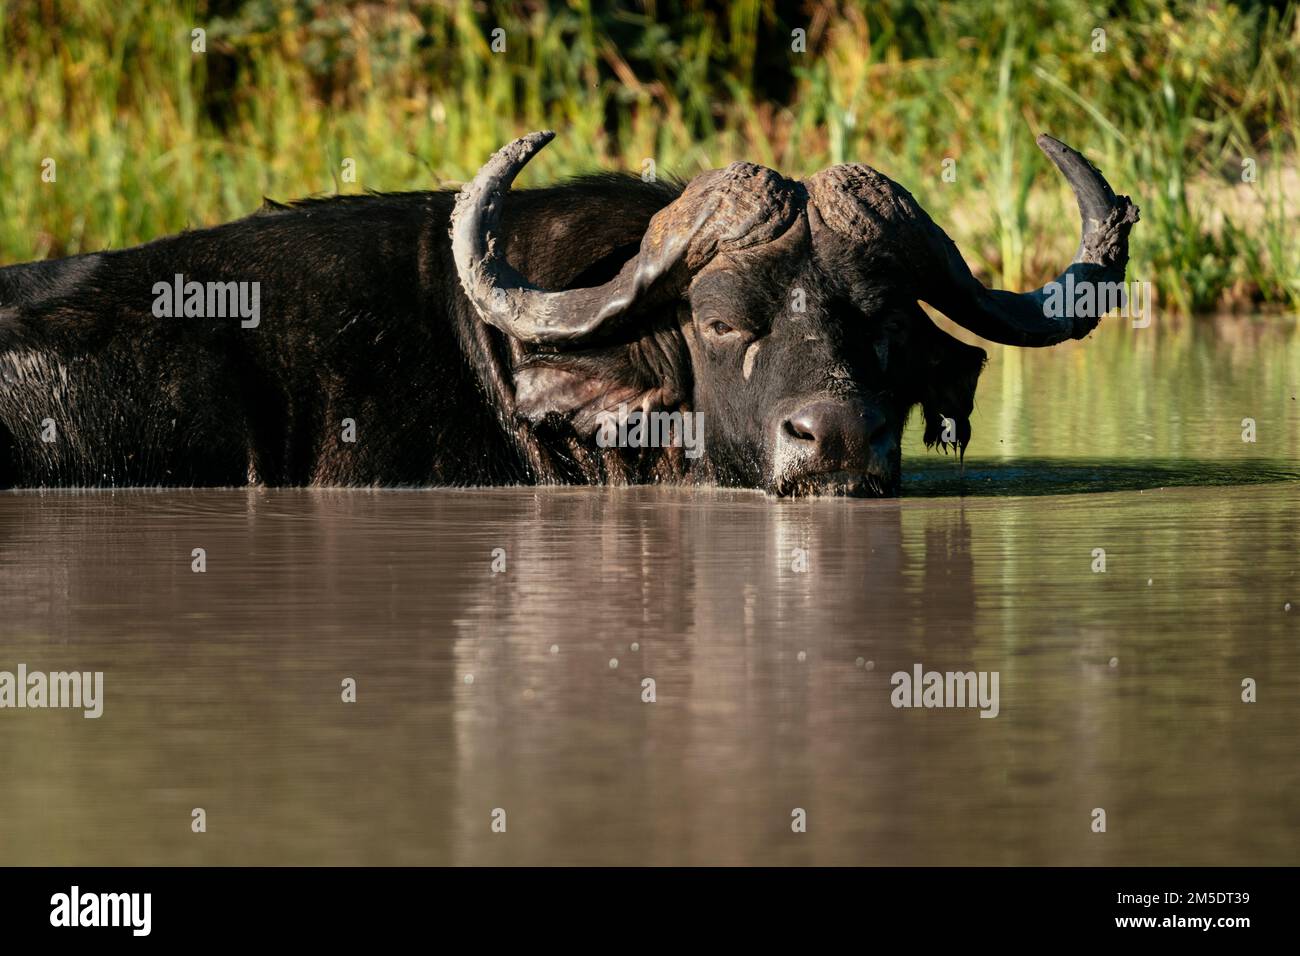 Cape Buffalo, Timbavati Private Nature Reserve, Kruger National Park, South Africa Stock Photo